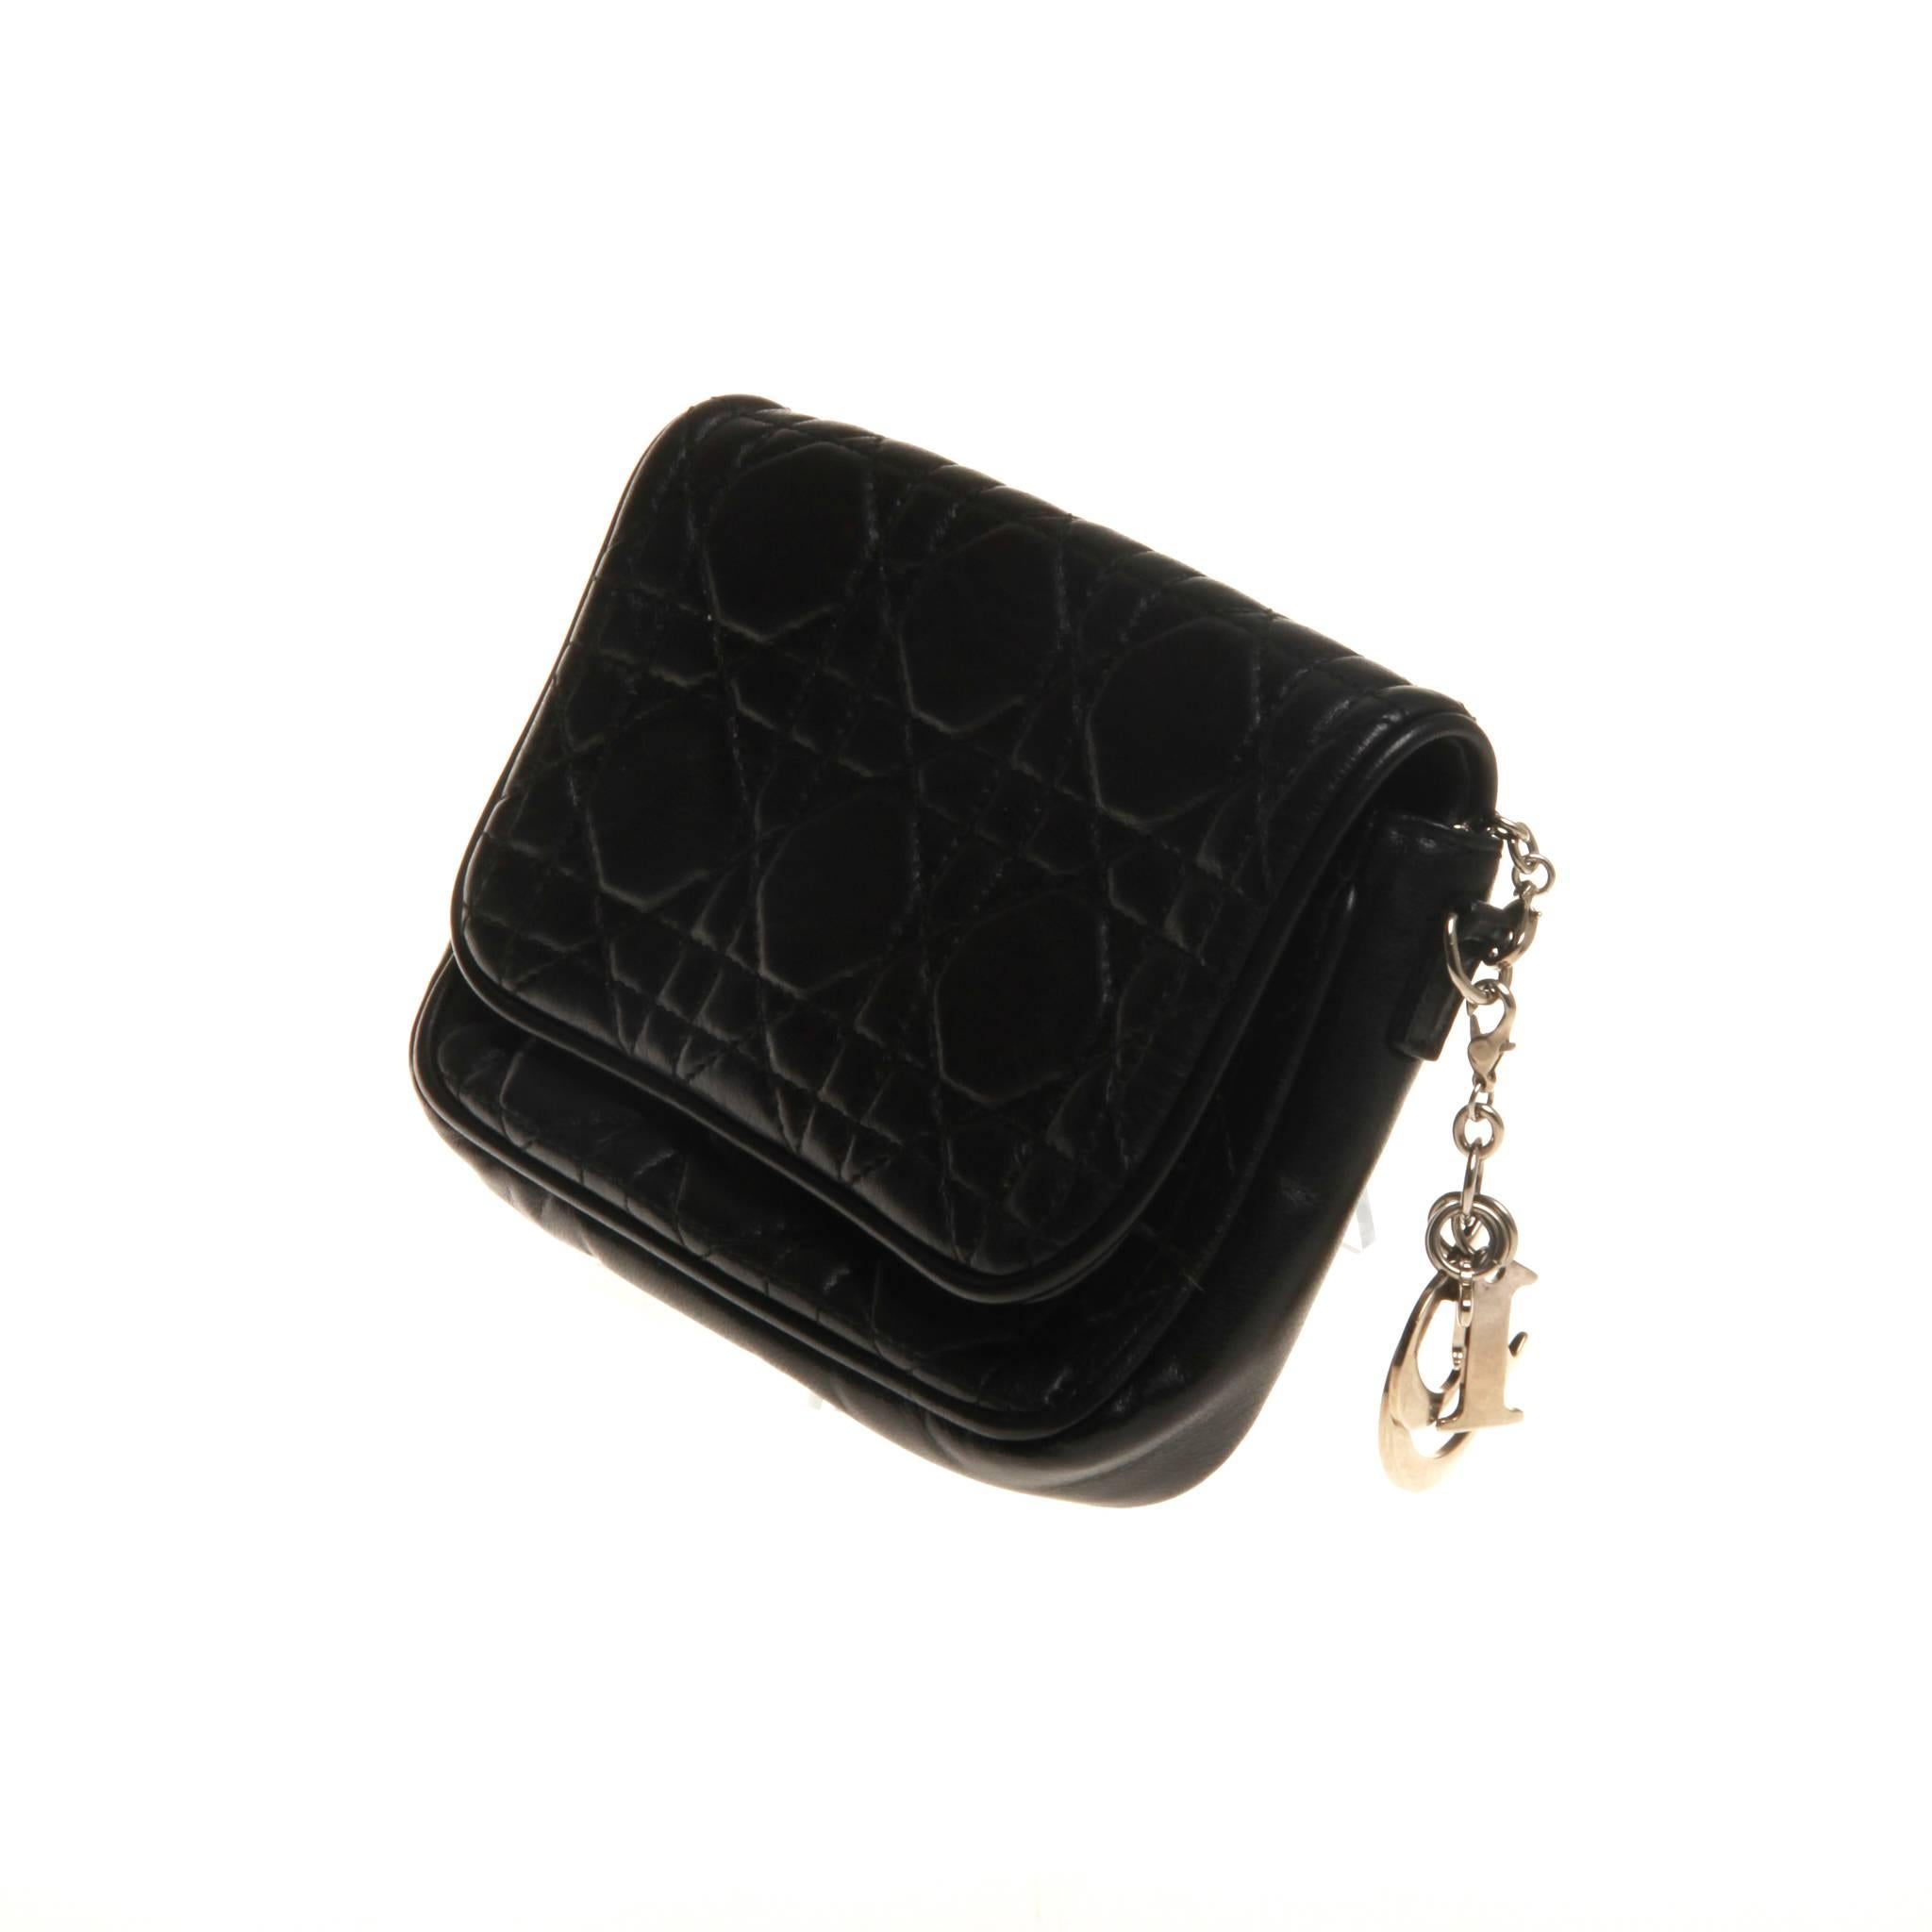 Black Cannage leather Christian Dior mini crossbody bag with silver-tone hardware, single chain-link shoulder strap, tonal leather interior, three card slots at interior wall and magnetic snap closure at front. 

With dust bag.

57cm chain drop.